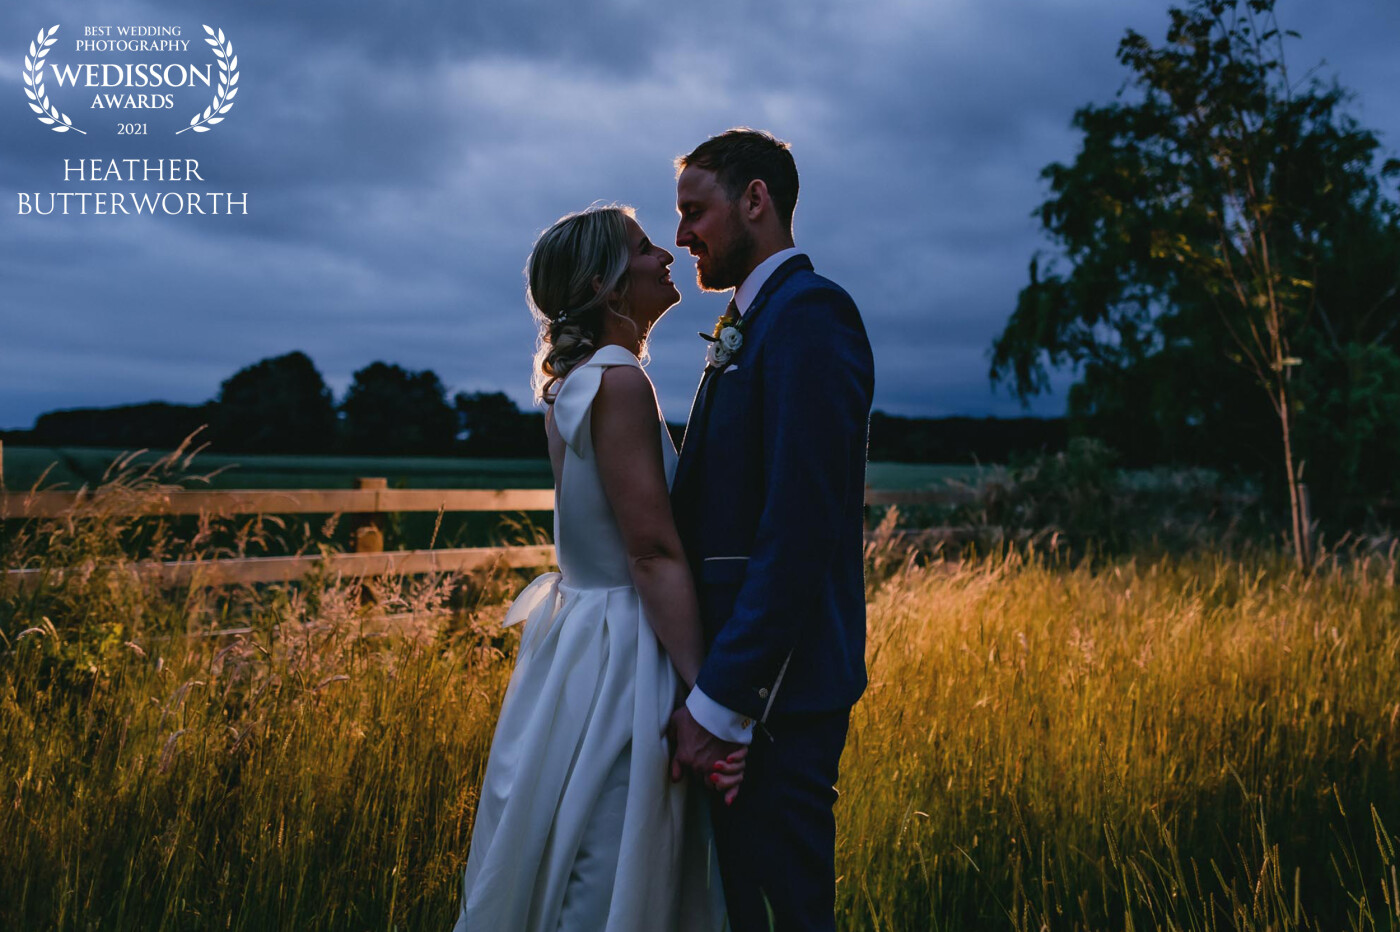 Sophie and Ralph had a beautiful elegant wedding at The Oakwood at Ryther near York. We had a stunning sunset engagement shoot a few weeks before and Sophie wanted some similar shots on the wedding day but the weather wasn't in agreement! So instead, I used some lighting and off camera flash to recreate the warmth and romantic feel of a sunset and they were thrilled with the results.